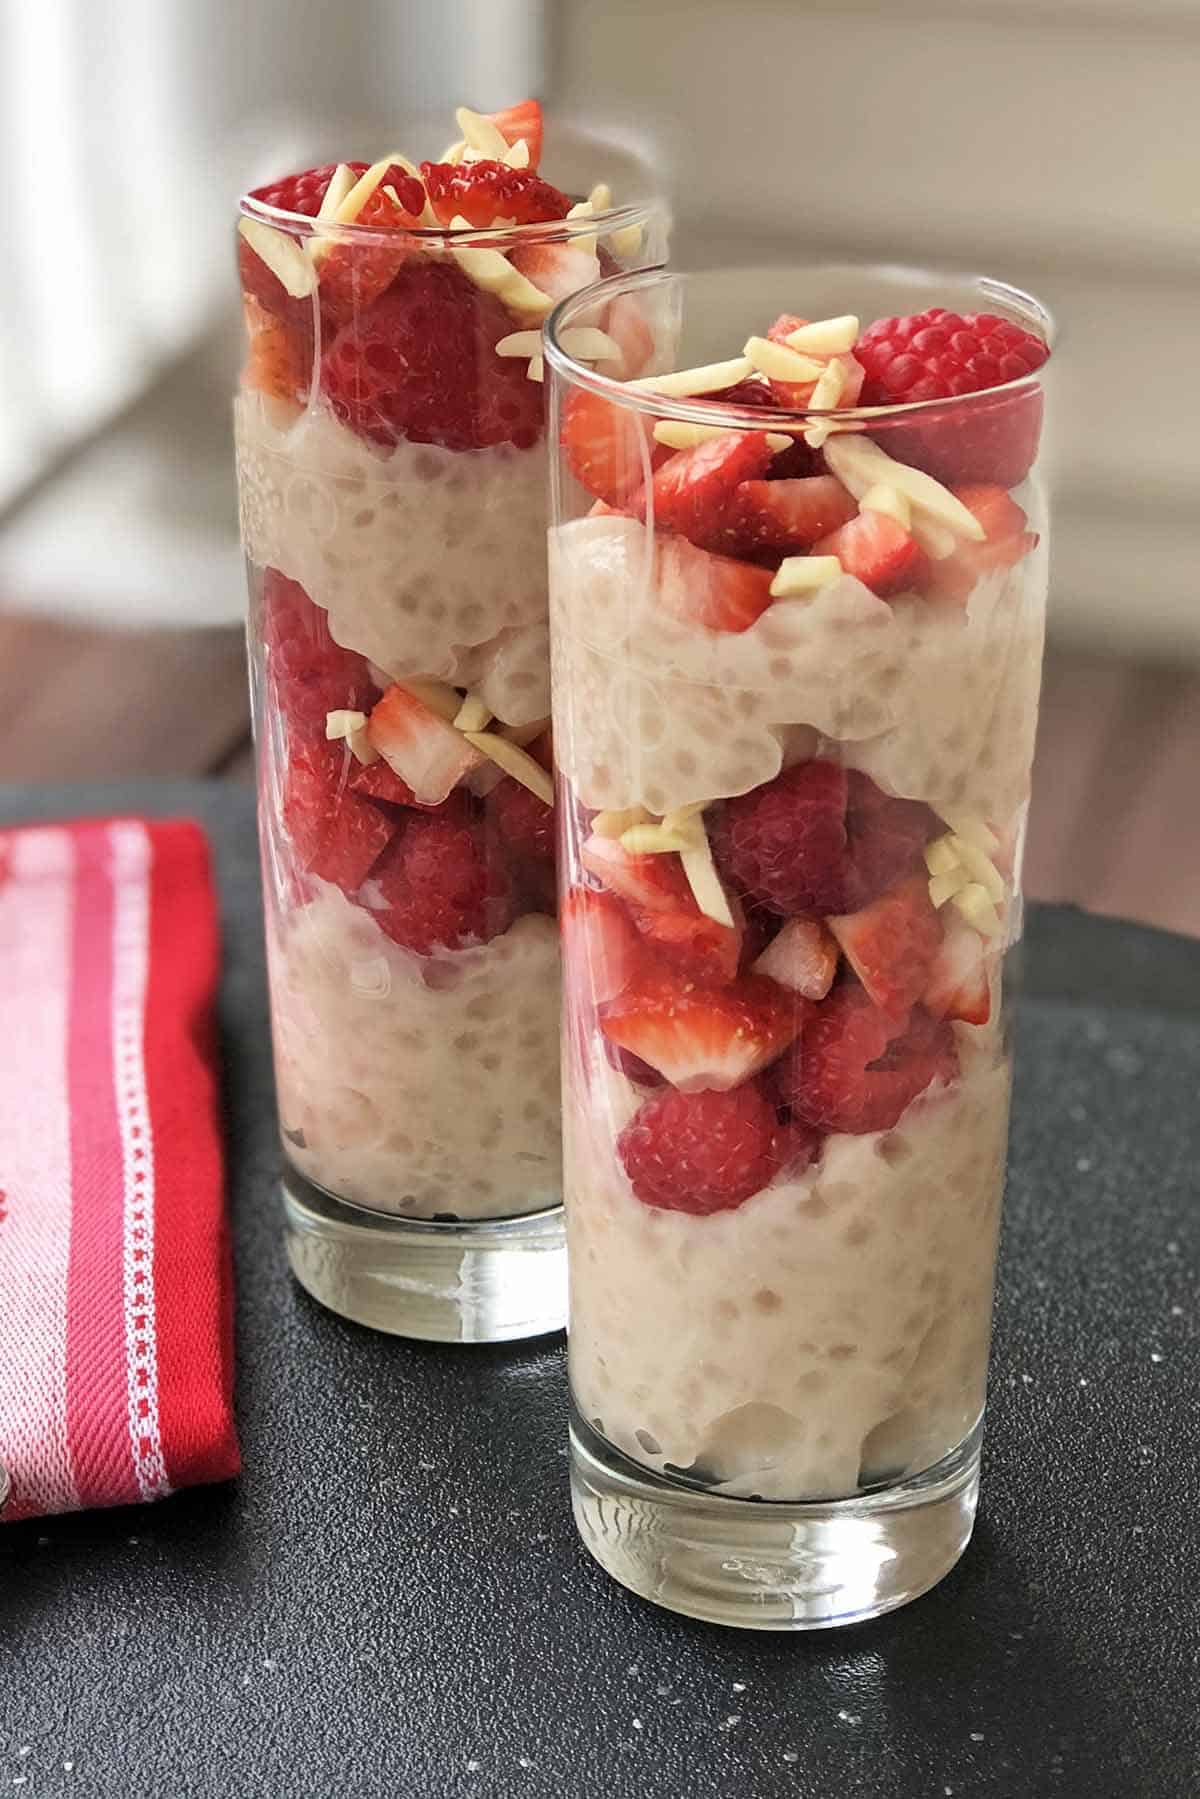 Two Tapioca Berry Parfaits in tall glasses with sliced strawberries, slivered almonds, and whole raspberries on top